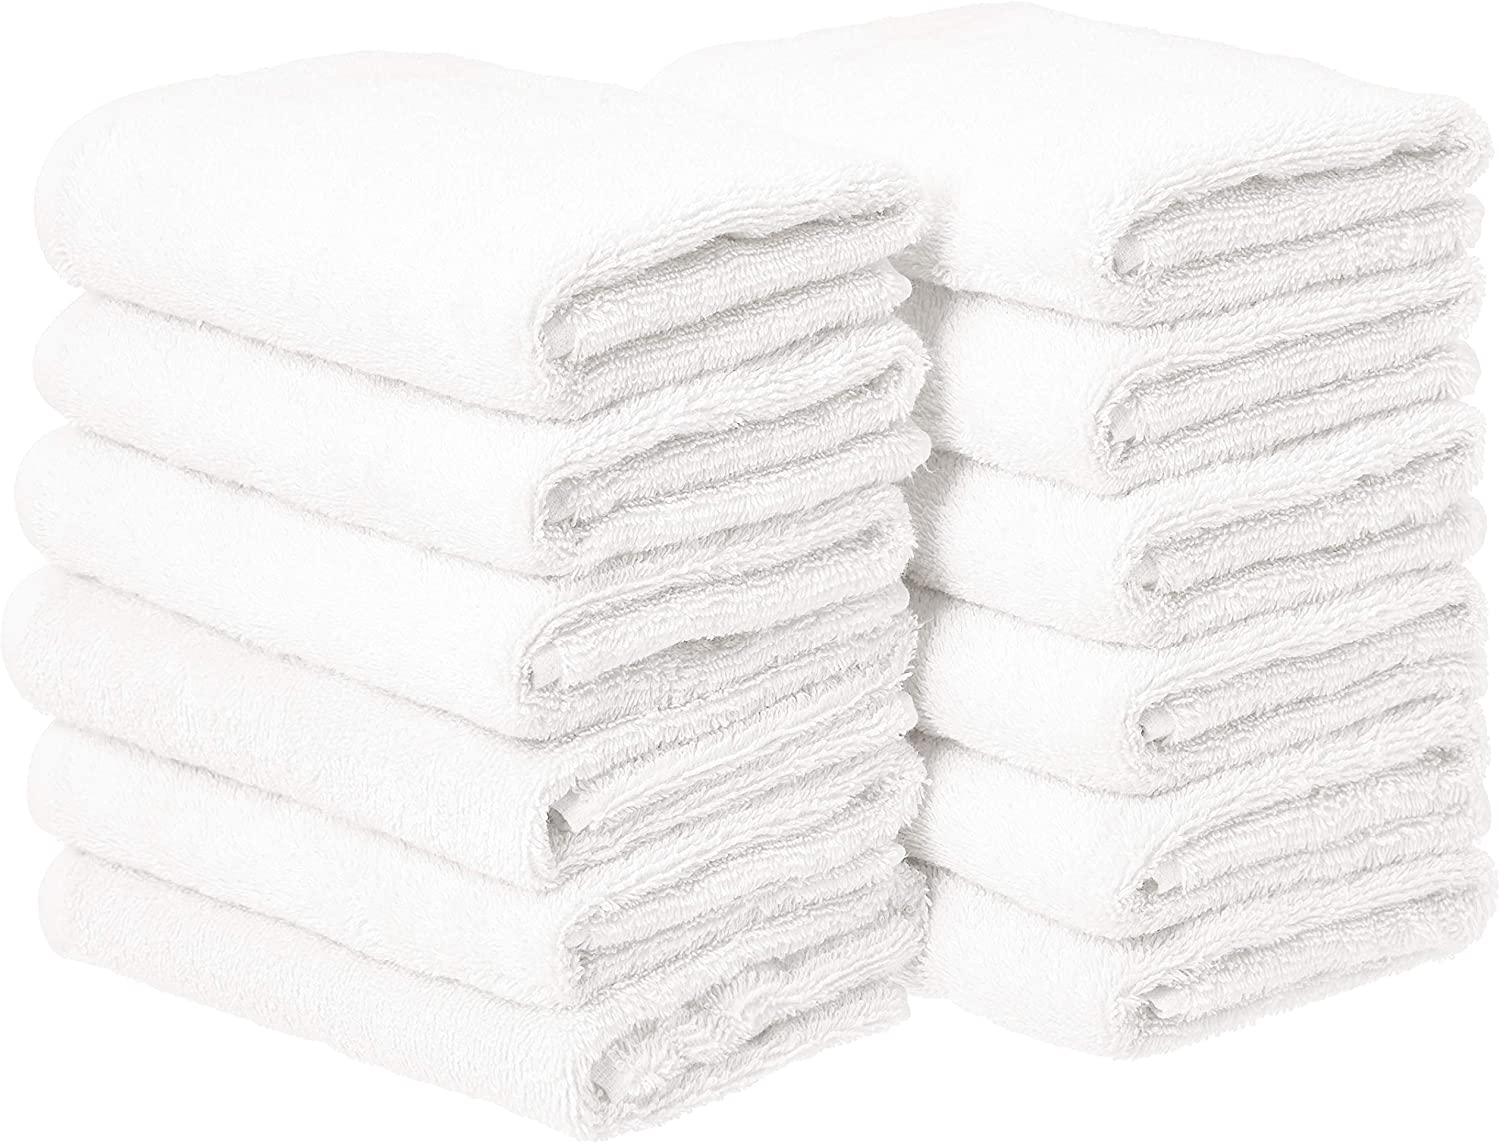 Wash Cloths - Soft and Quick Drying - Absorbent Microfiber Towels 13x11"